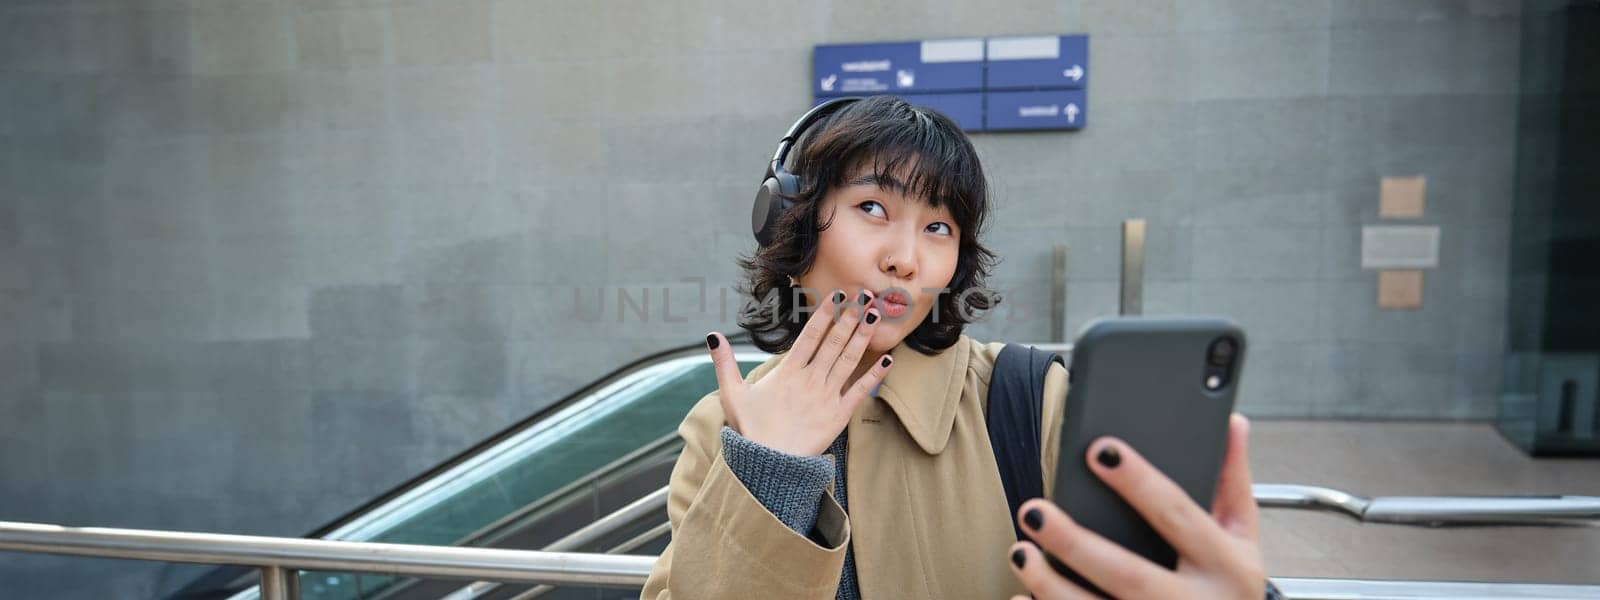 Cute and funny korean girl in headphones, posing for selfie, takes photo on smartphone and looks silly, stands on street in city.